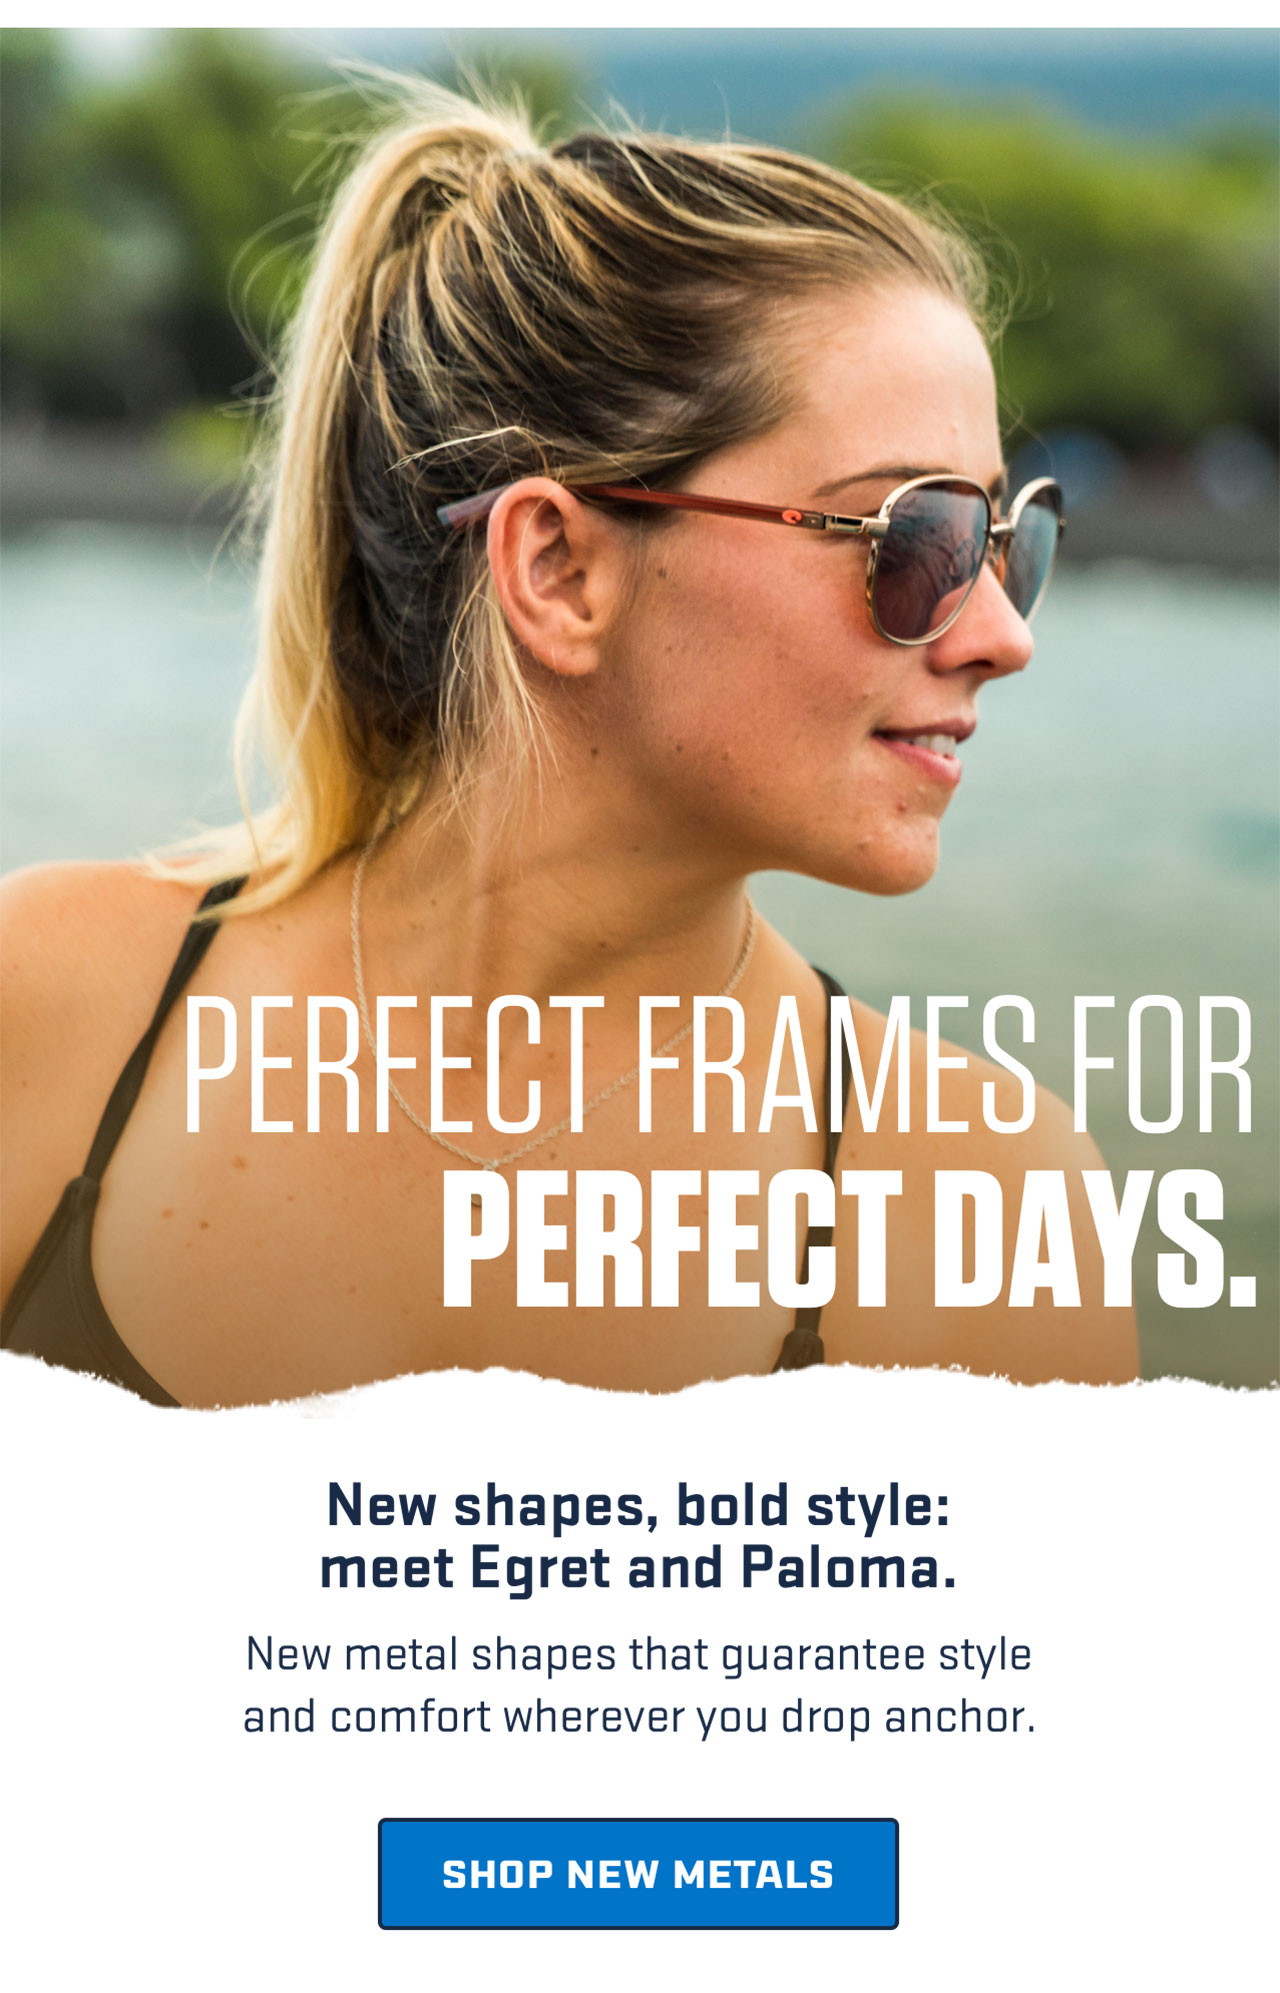 

PERFECT FRAMES FOR
PERFECT DAYS.

New shapes, bold style:
meet Egret and Paloma.
New metal shapes that guarantee style
and comfort wherever you drop anchor.

[ SHOP NEW METALS ]


									